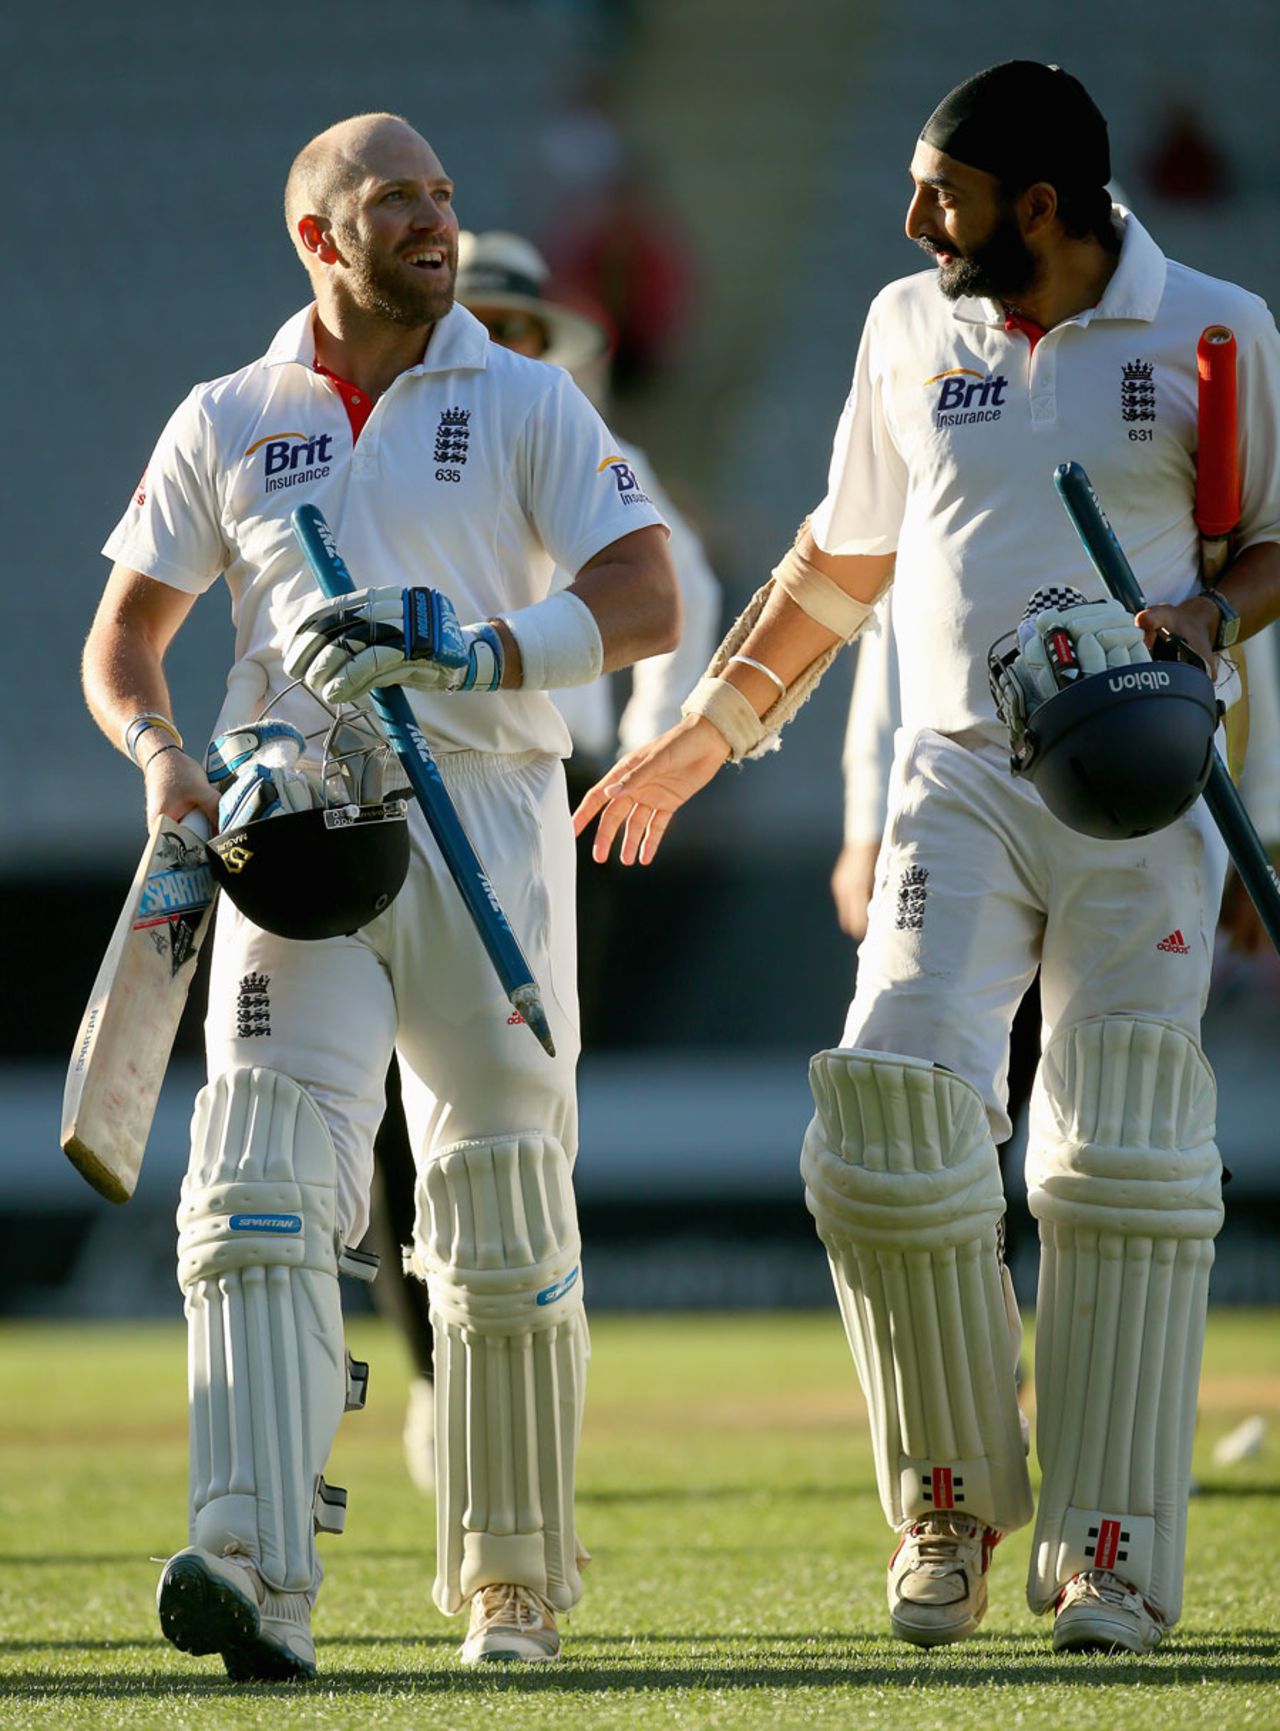 Matt Prior and Monty Panesar walk off after securing a draw, New Zealand v England, 3rd Test, Auckland, 5th day, March 26, 2013